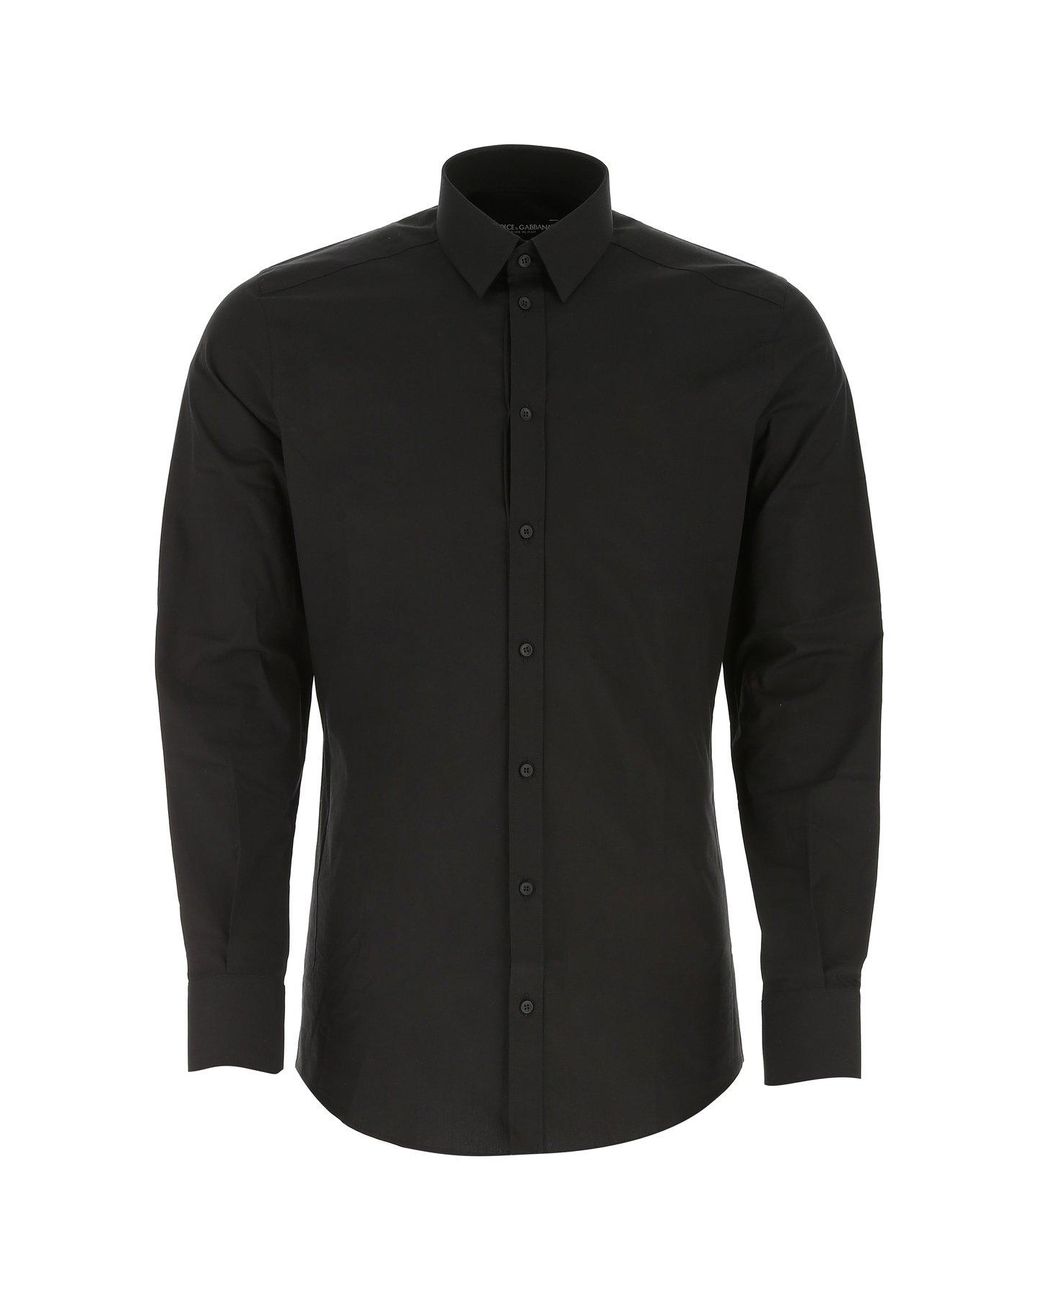 Dolce & Gabbana Cotton Classic Tailored Shirt in Black for Men - Lyst